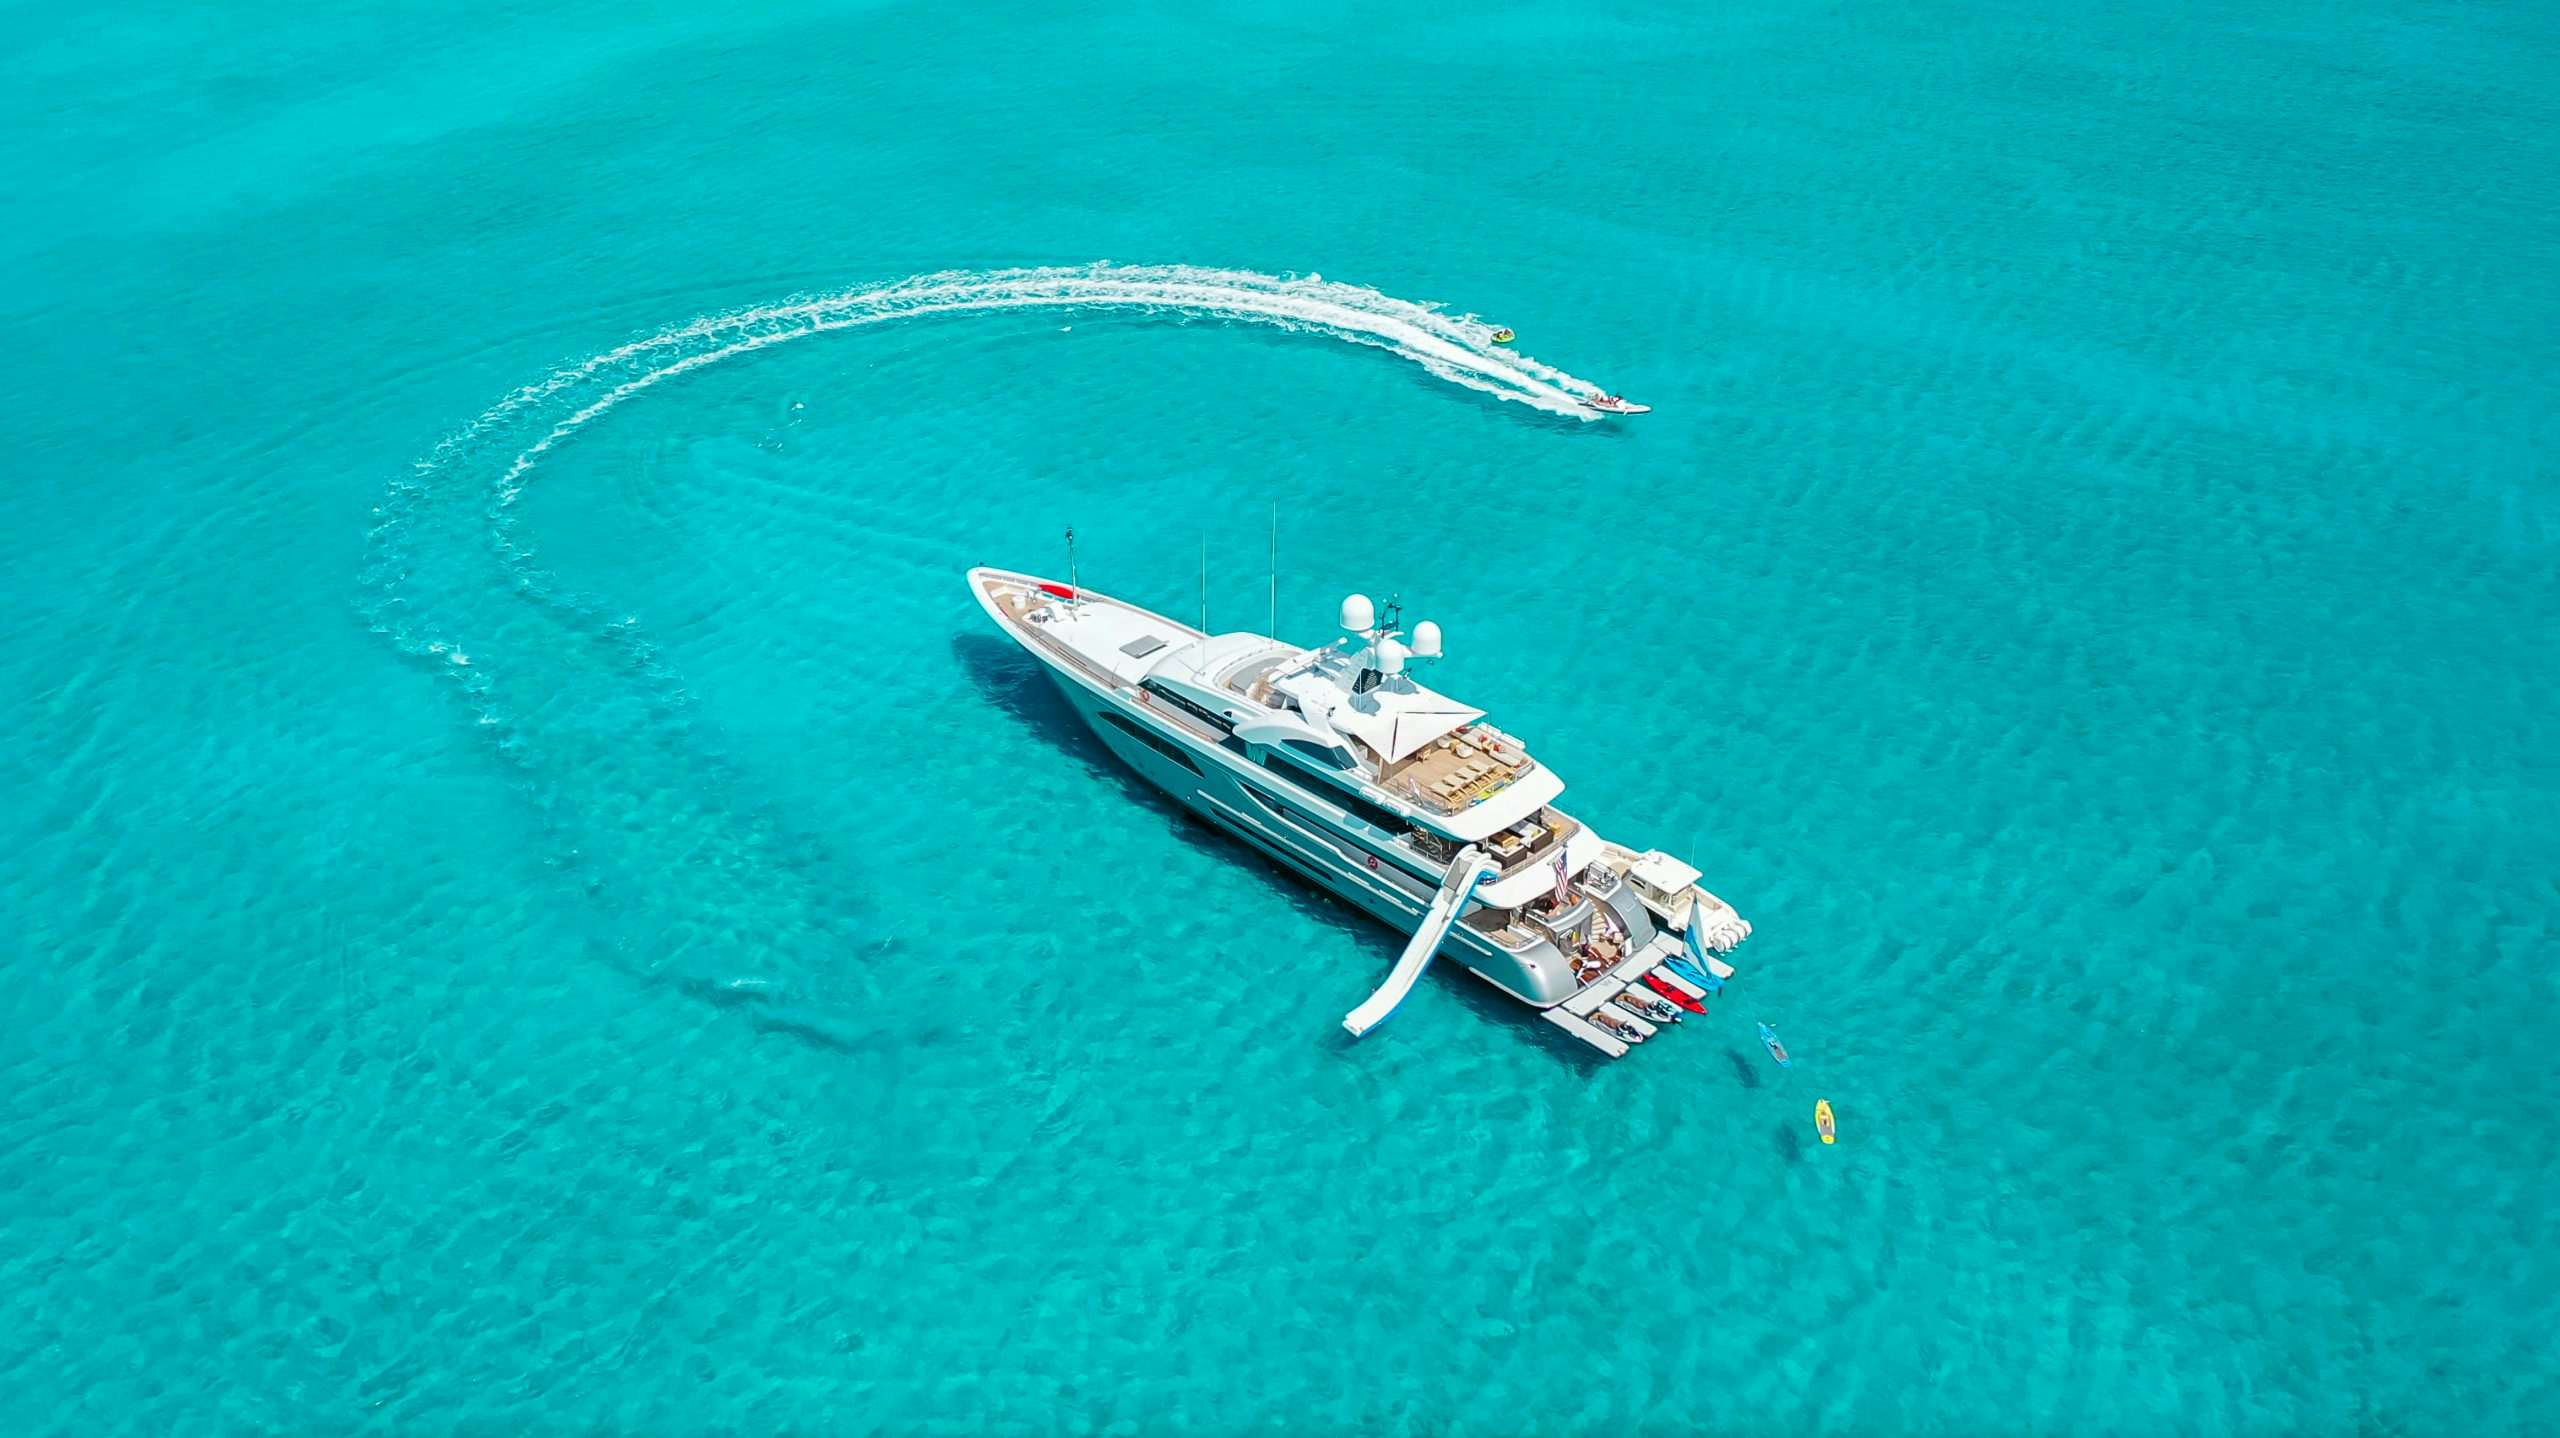 189' (57.6m) Feadship charter yacht W with all her toys out anchored in the Bahamas